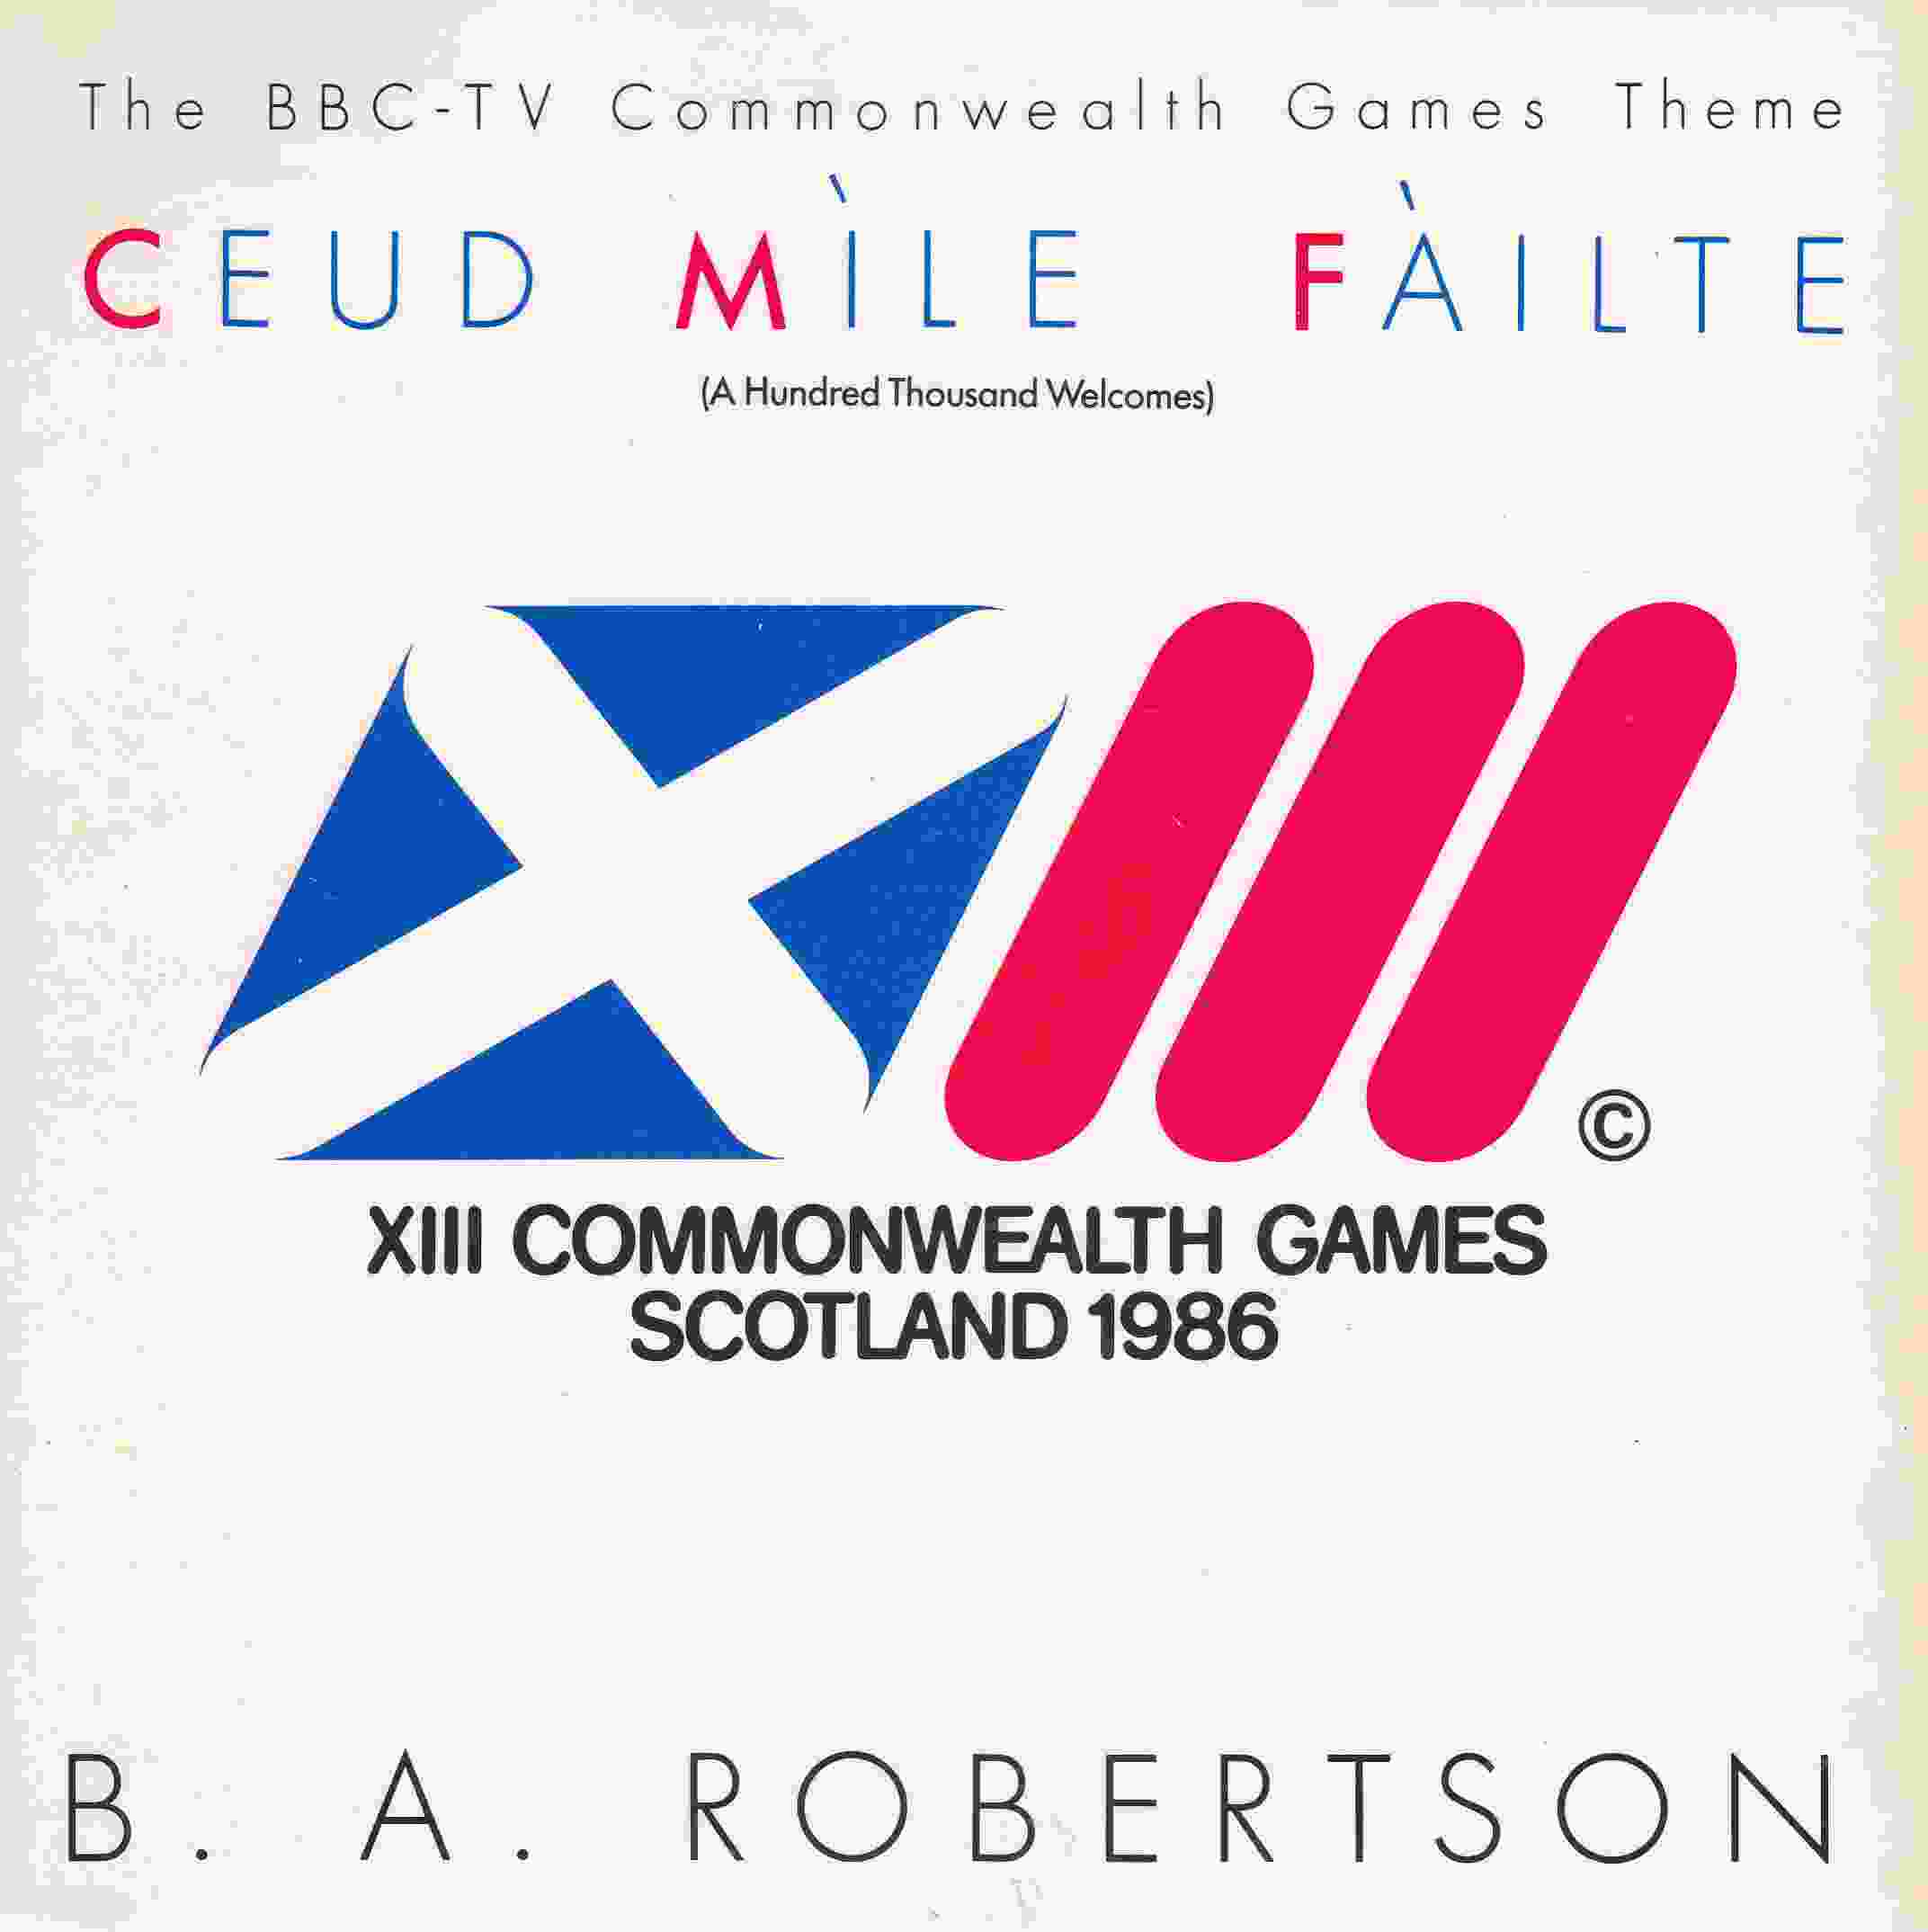 Picture of RESL 192 Ceud mile failte (Commonwealth games '86) by artist B. A. Robertson from the BBC singles - Records and Tapes library